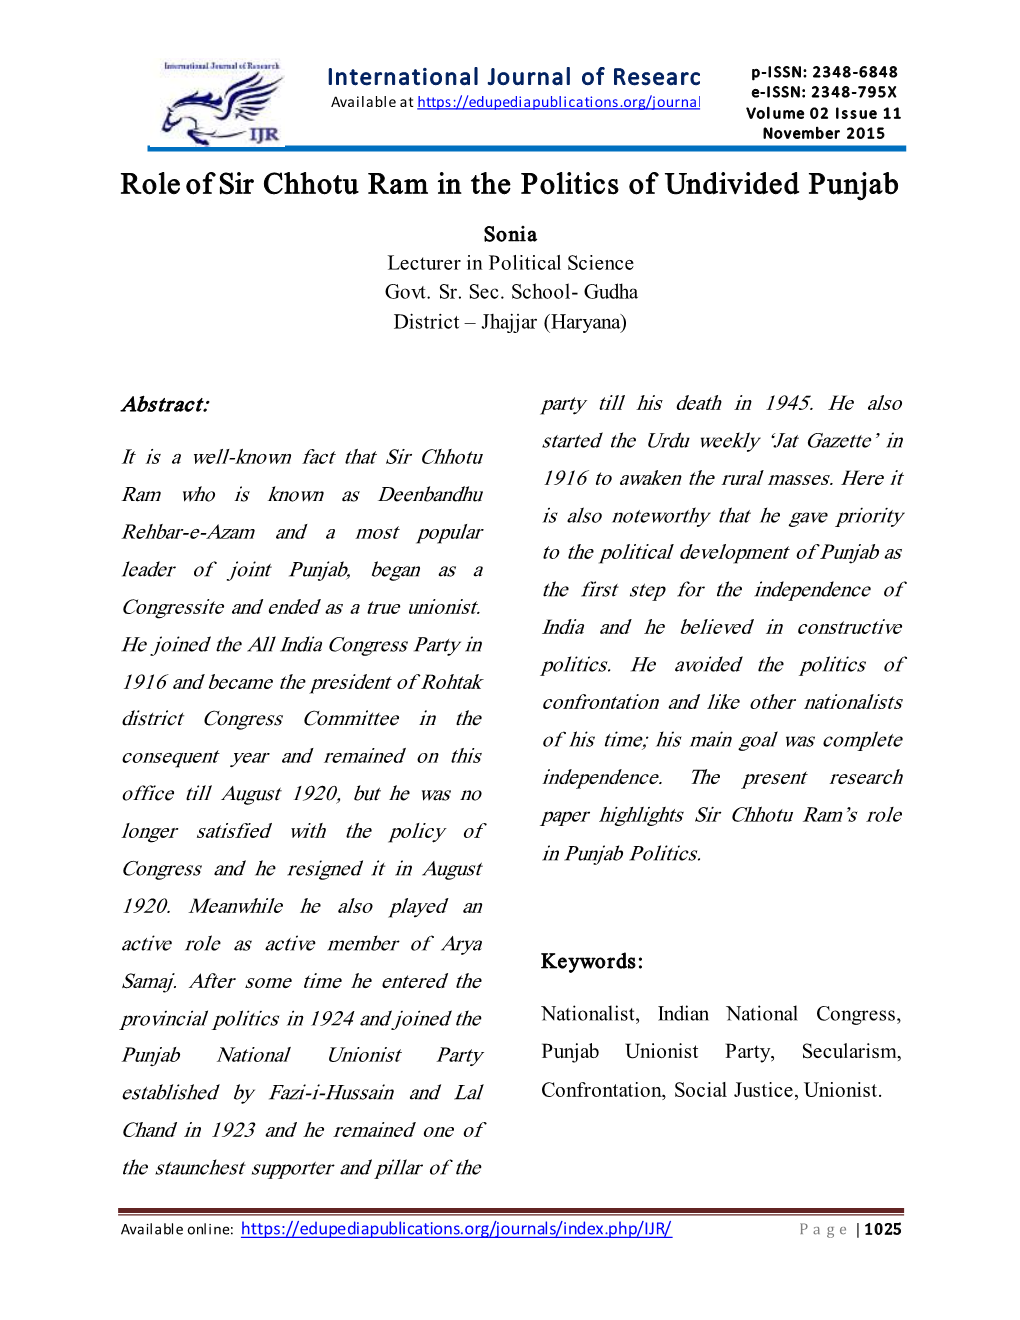 Role of Sir Chhotu Ram in the Politics of Undivided Punjab